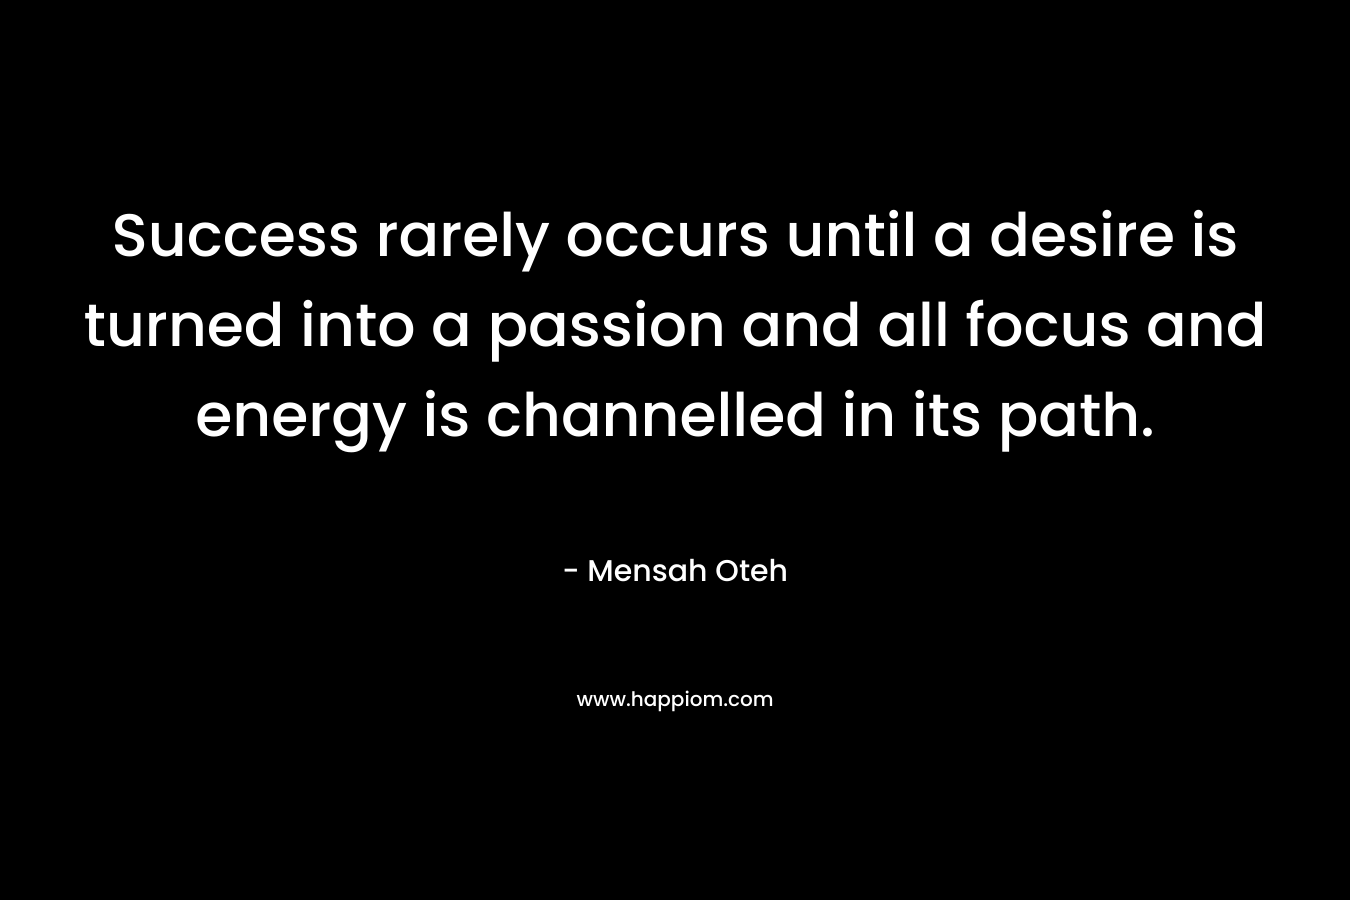 Success rarely occurs until a desire is turned into a passion and all focus and energy is channelled in its path.